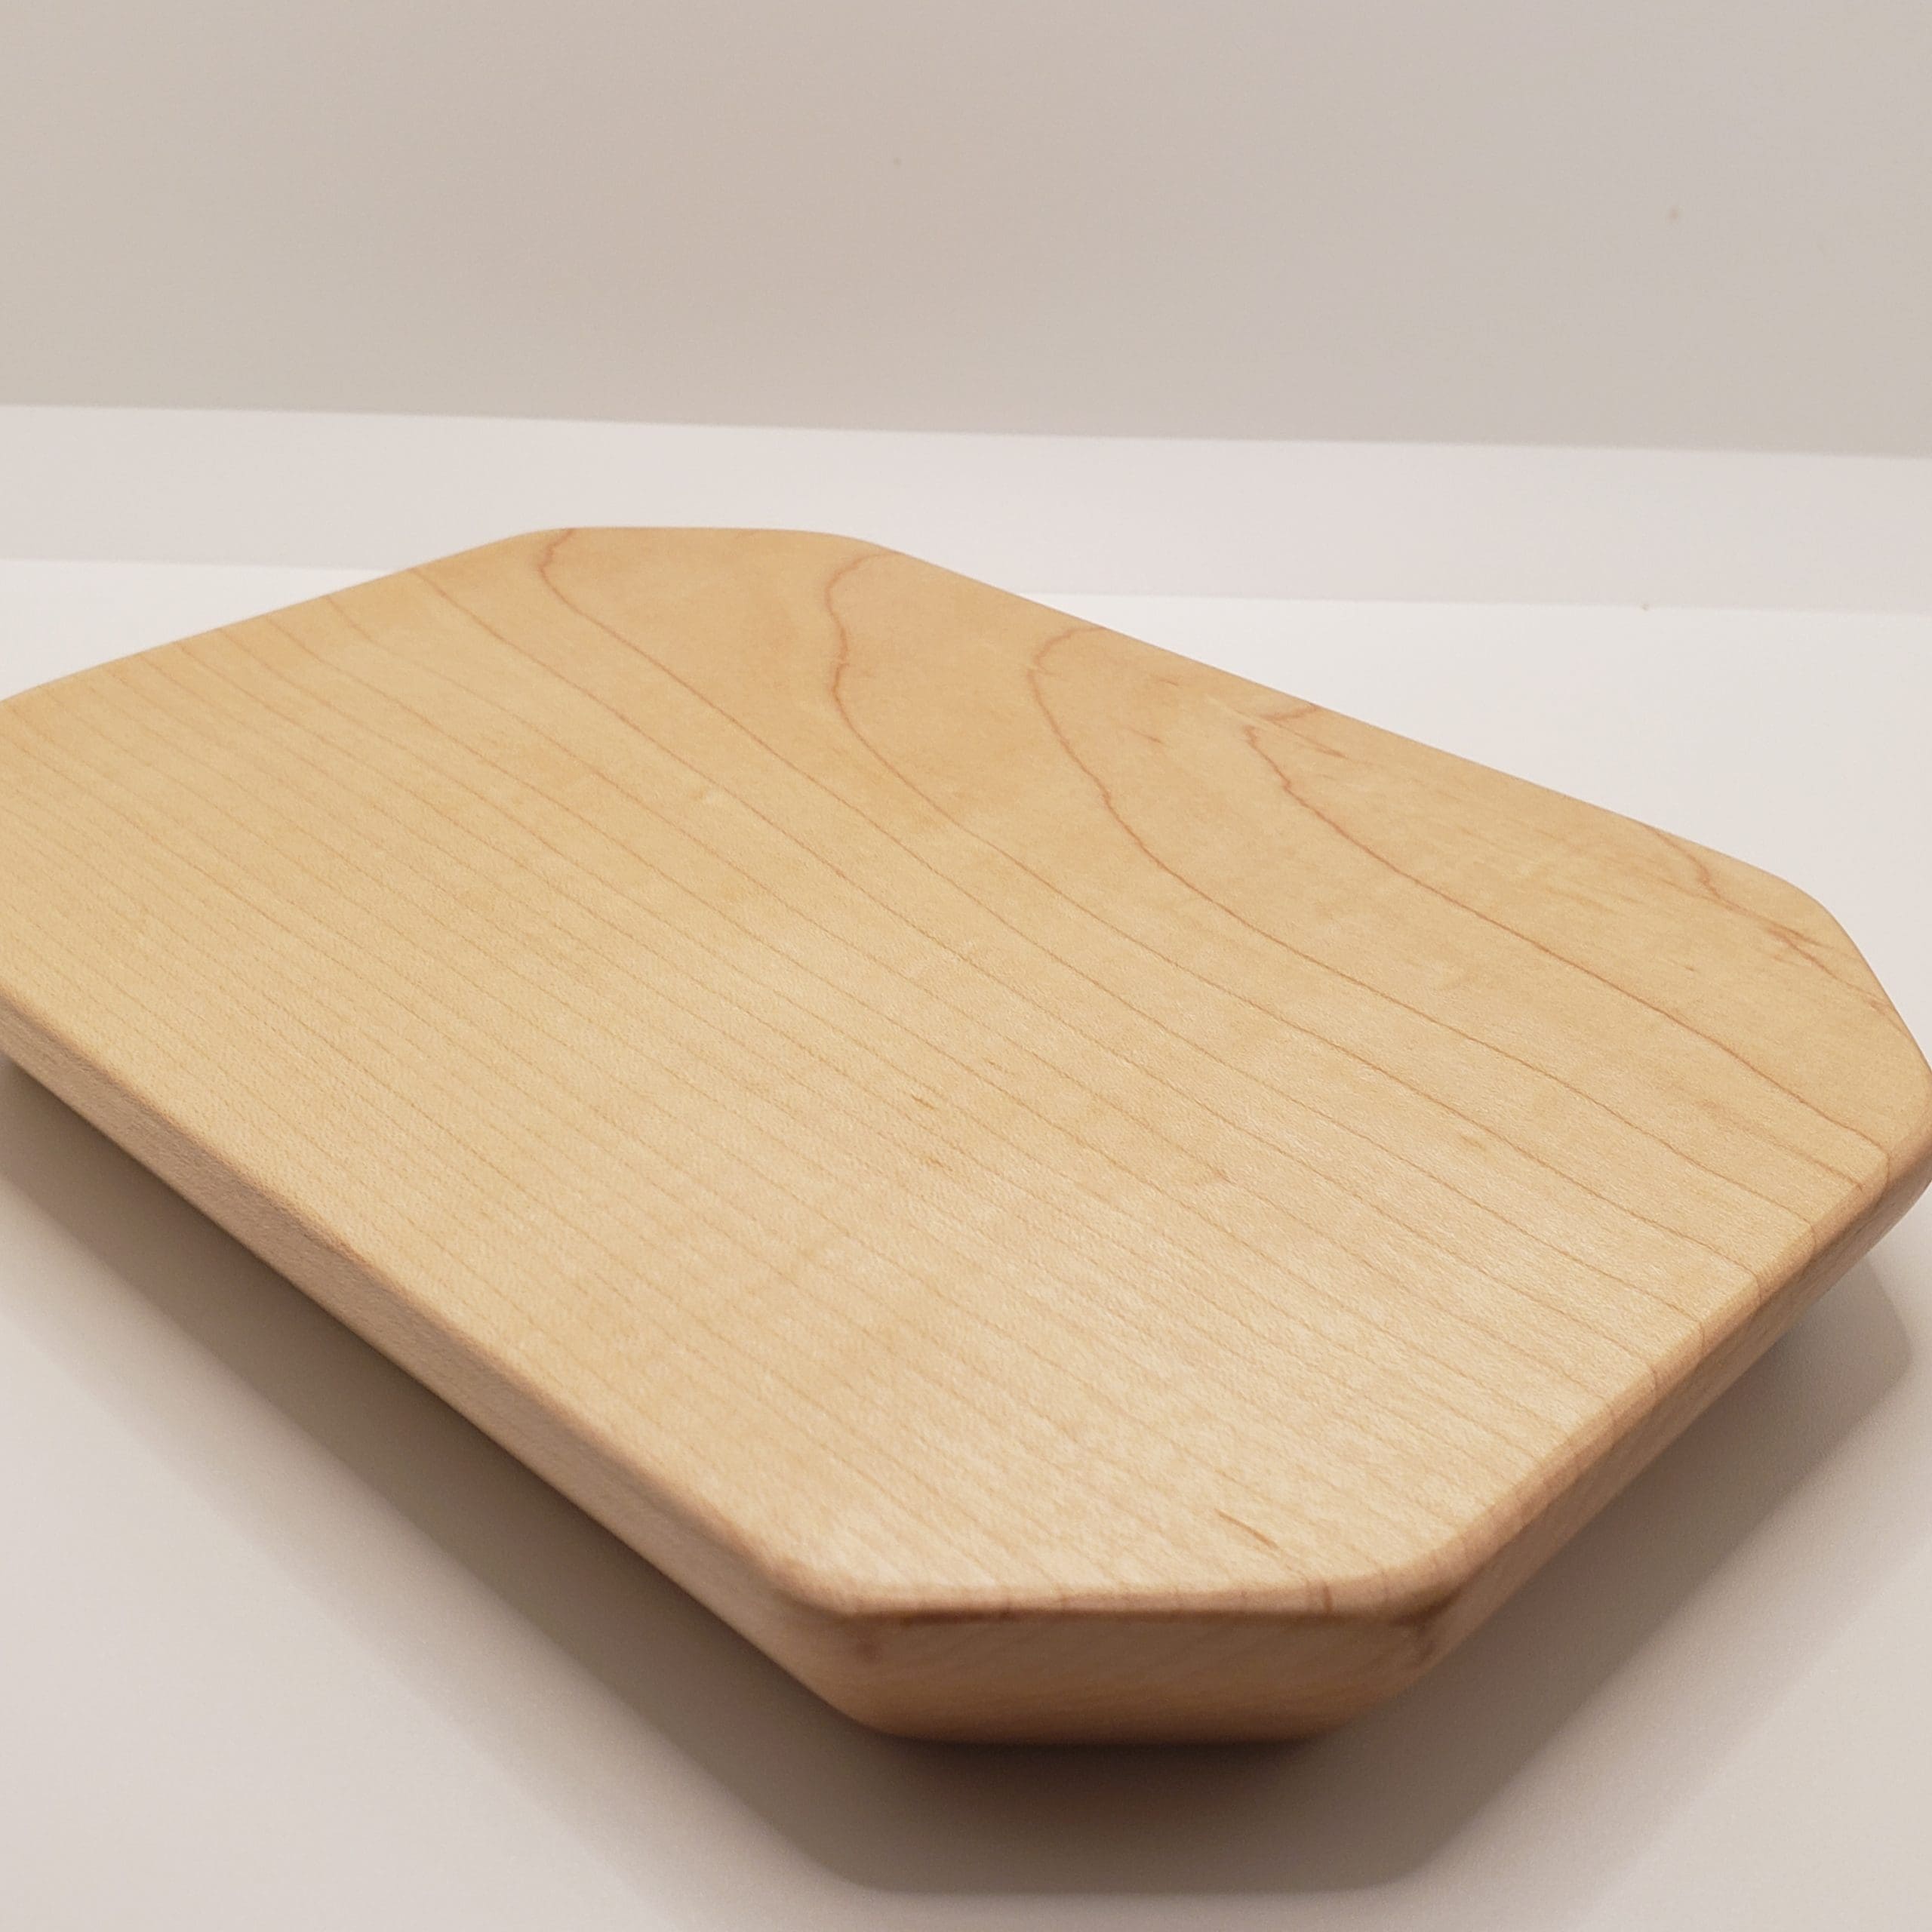 Wooden Cutting Board for Kids